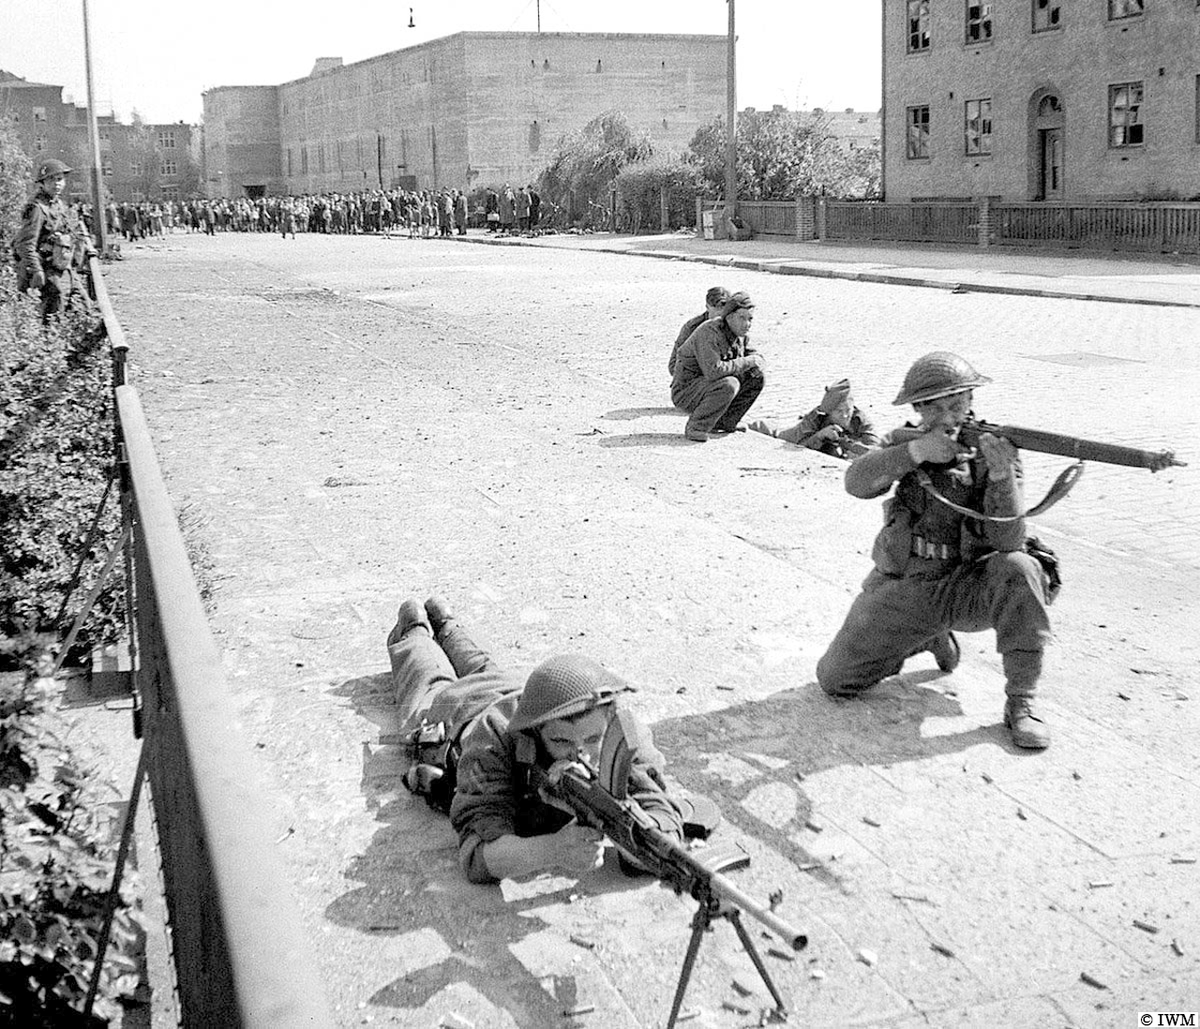 (Not posed.) #OTD in 1945, Bremen, Germany. Men from King's Own Scottish Borderers. Note the giant Luftschutzbunker in the background. #WW2 #HISTORY